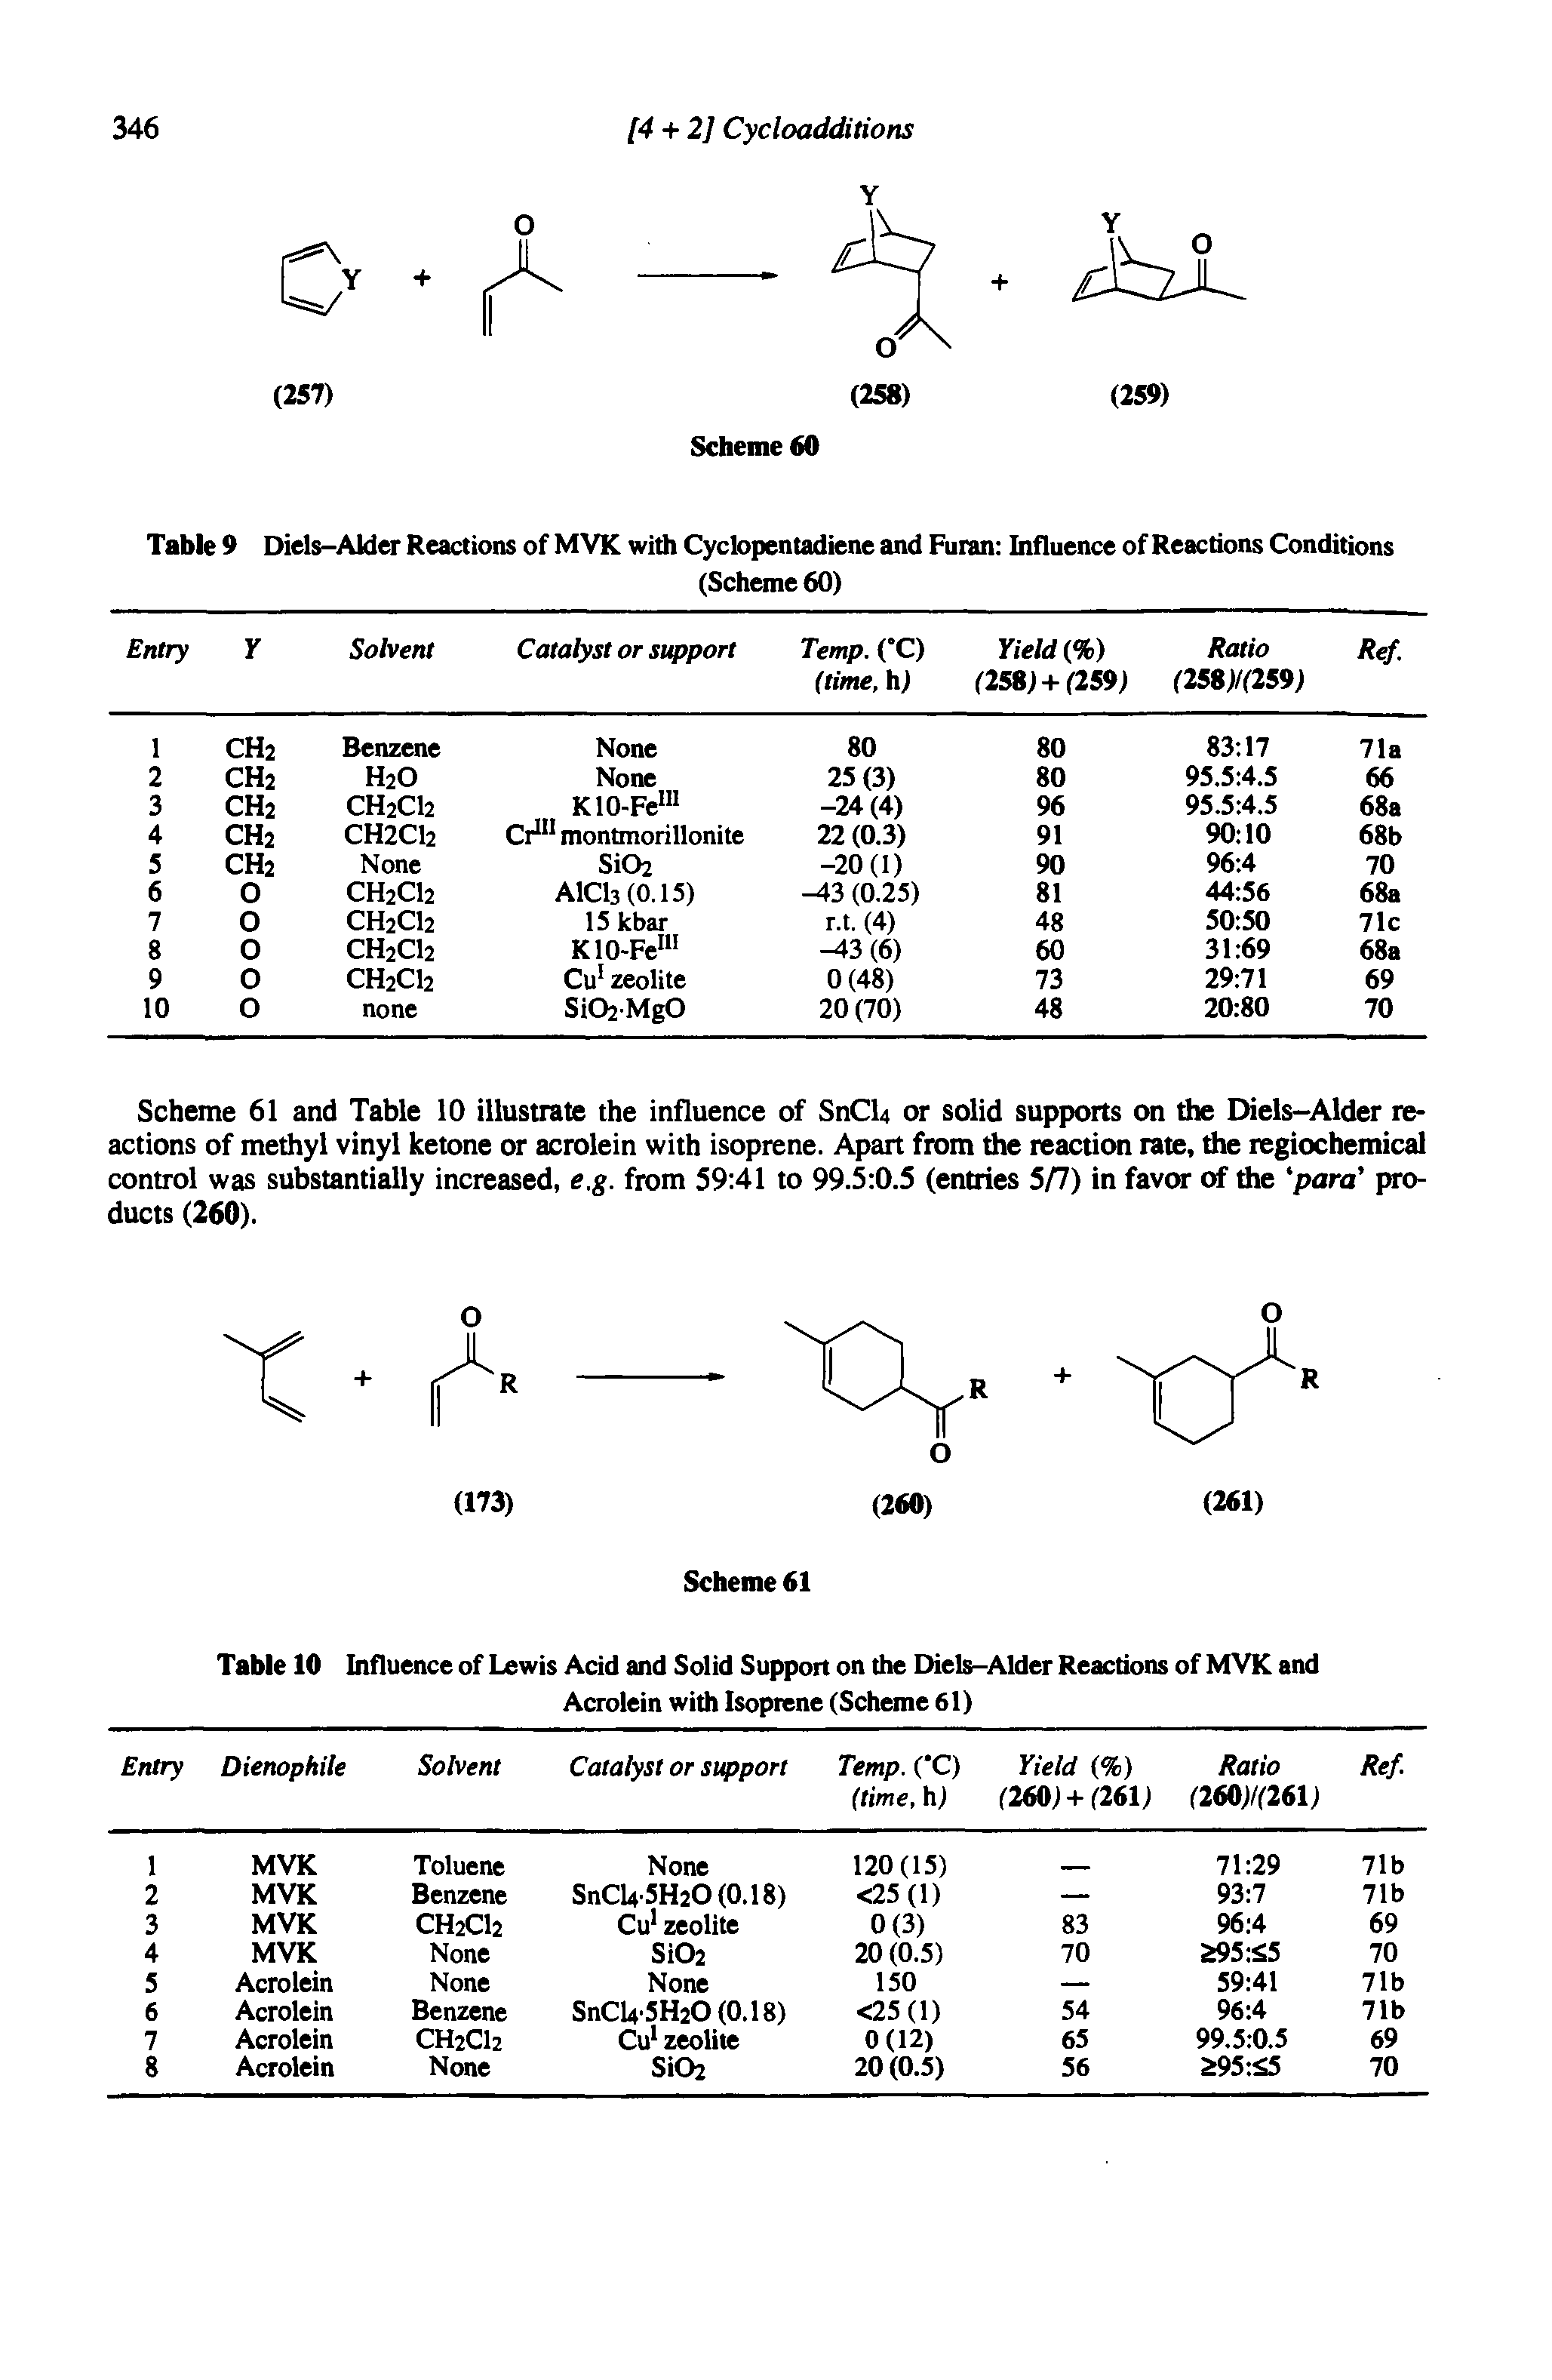 Table 10 Influence of Lewis Acid and Solid Support on the Diels-Alder Reactions of MVK and...